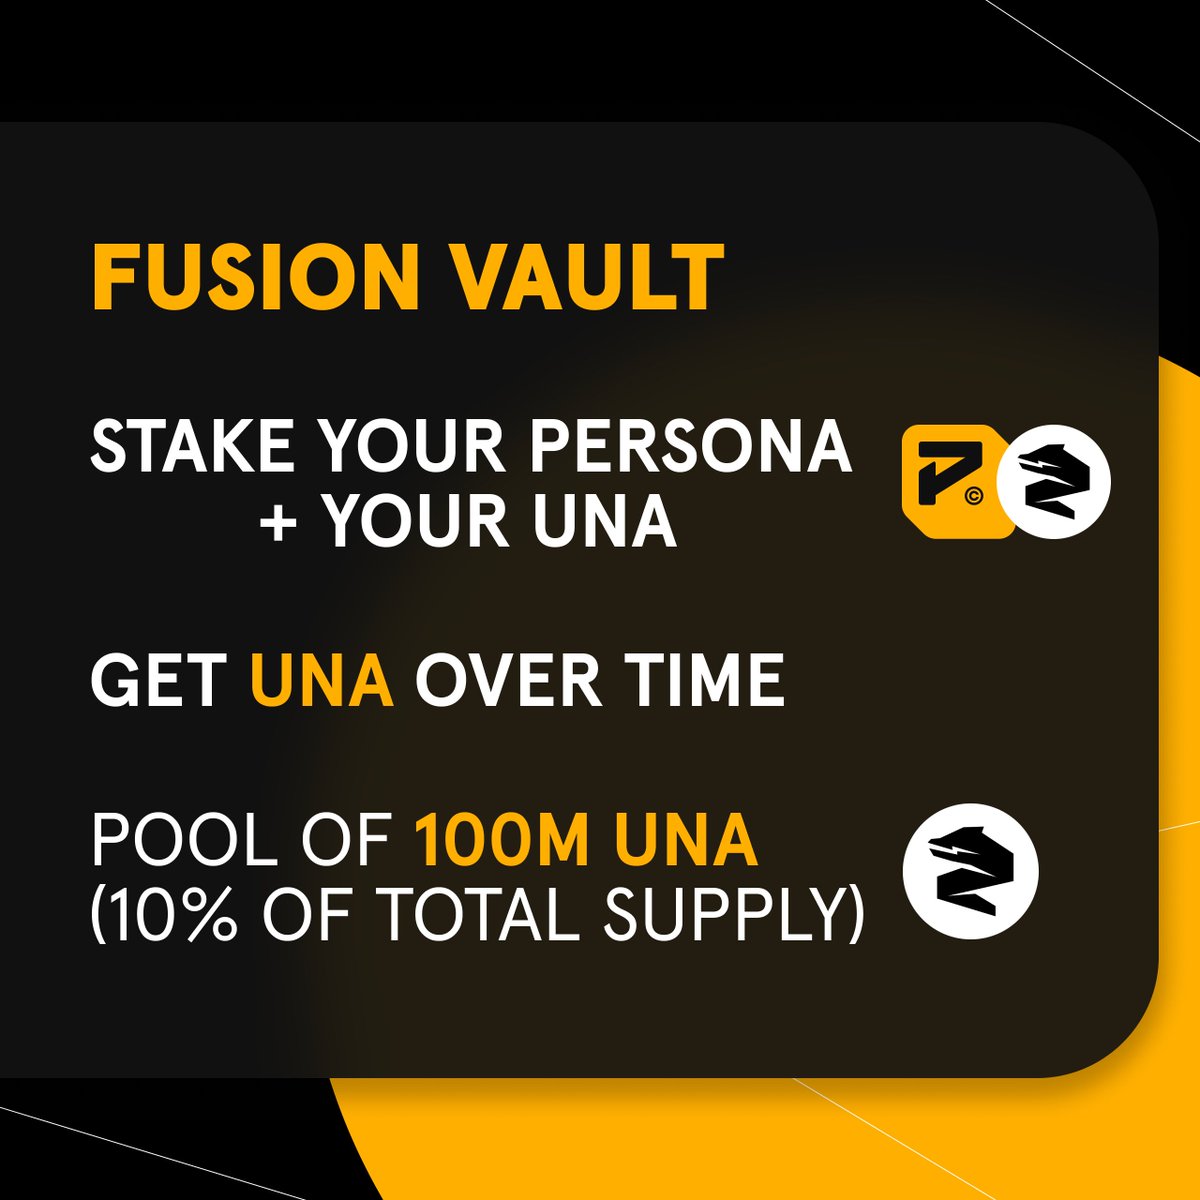 More information on the upcoming $UNA benefits for Persona holders Two types of staking mechanisms with different objectives: 👉Holder's Perks: Short term rewards 👉Fusion Vault: Longer term benefits We'll share more details closer to TGE! 🔥